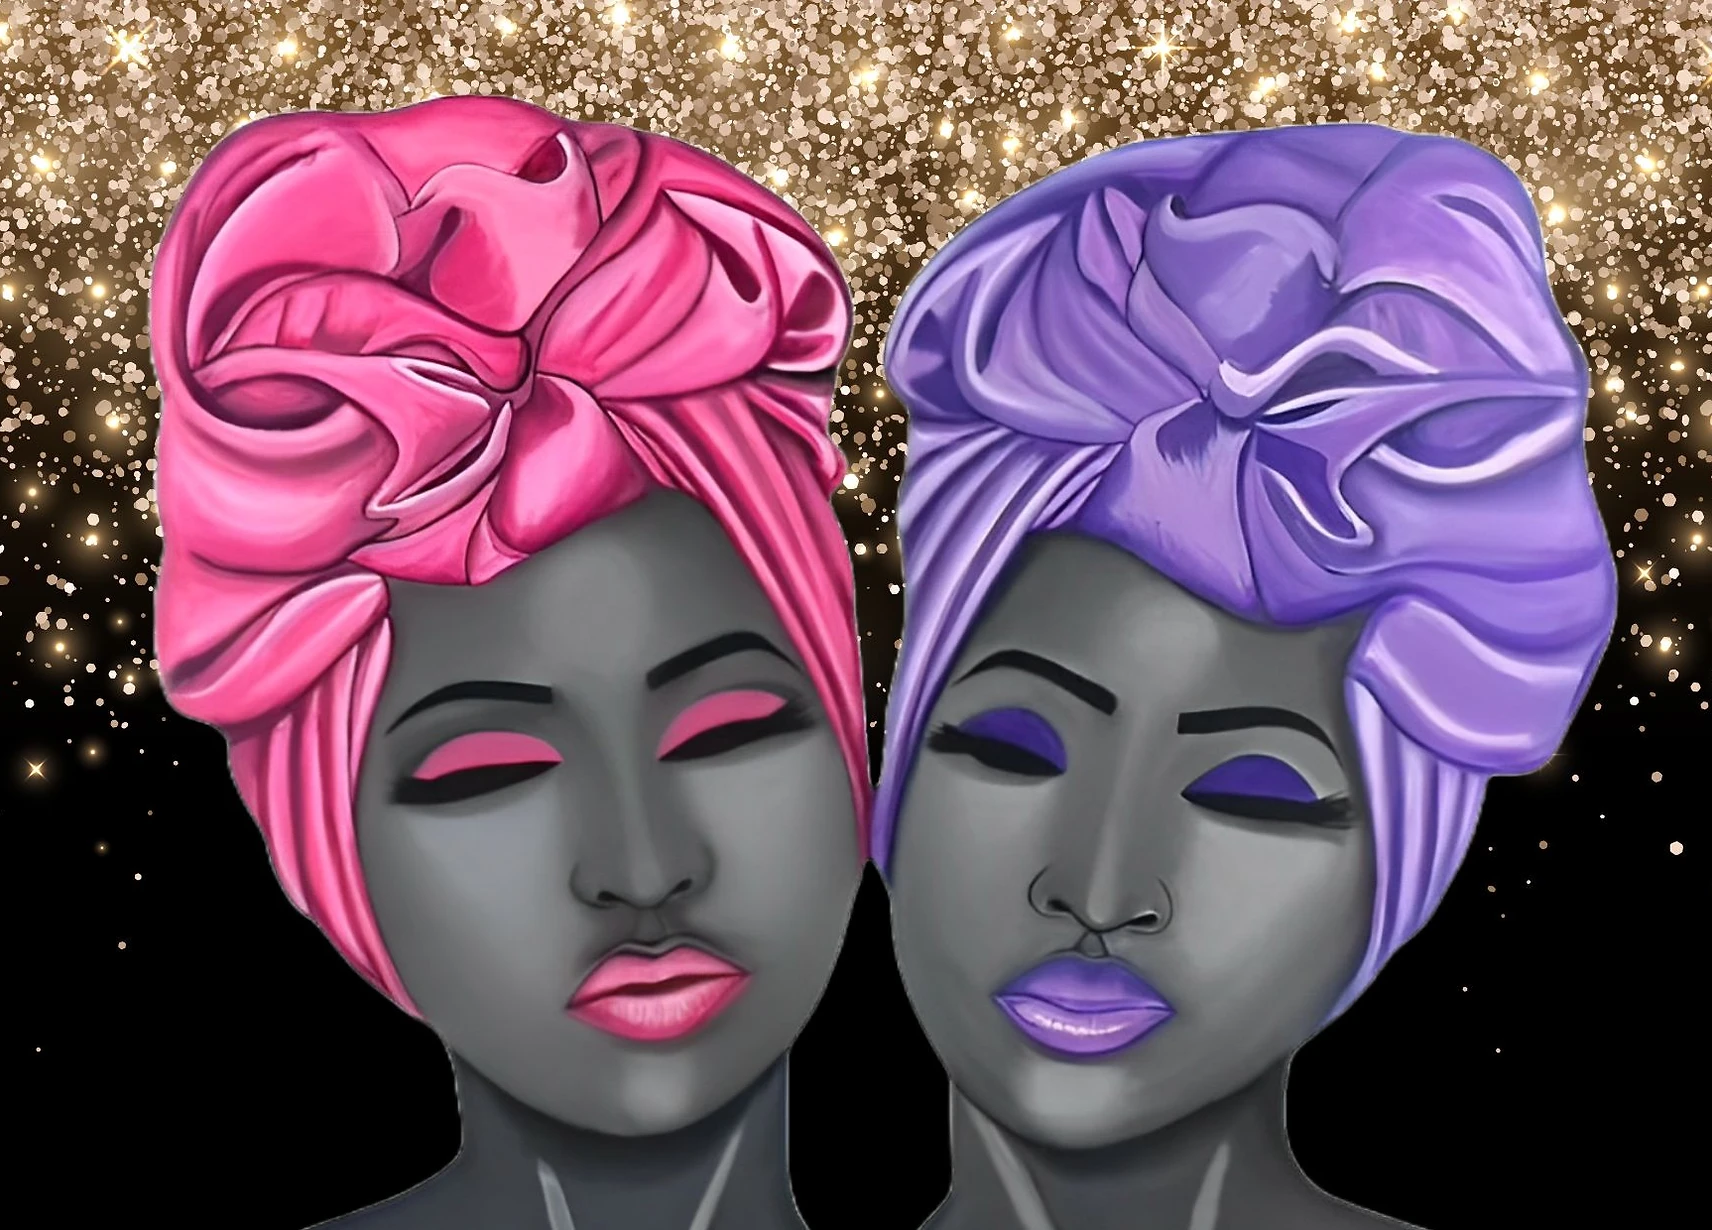 art piece with two women with pink and purple head scarves